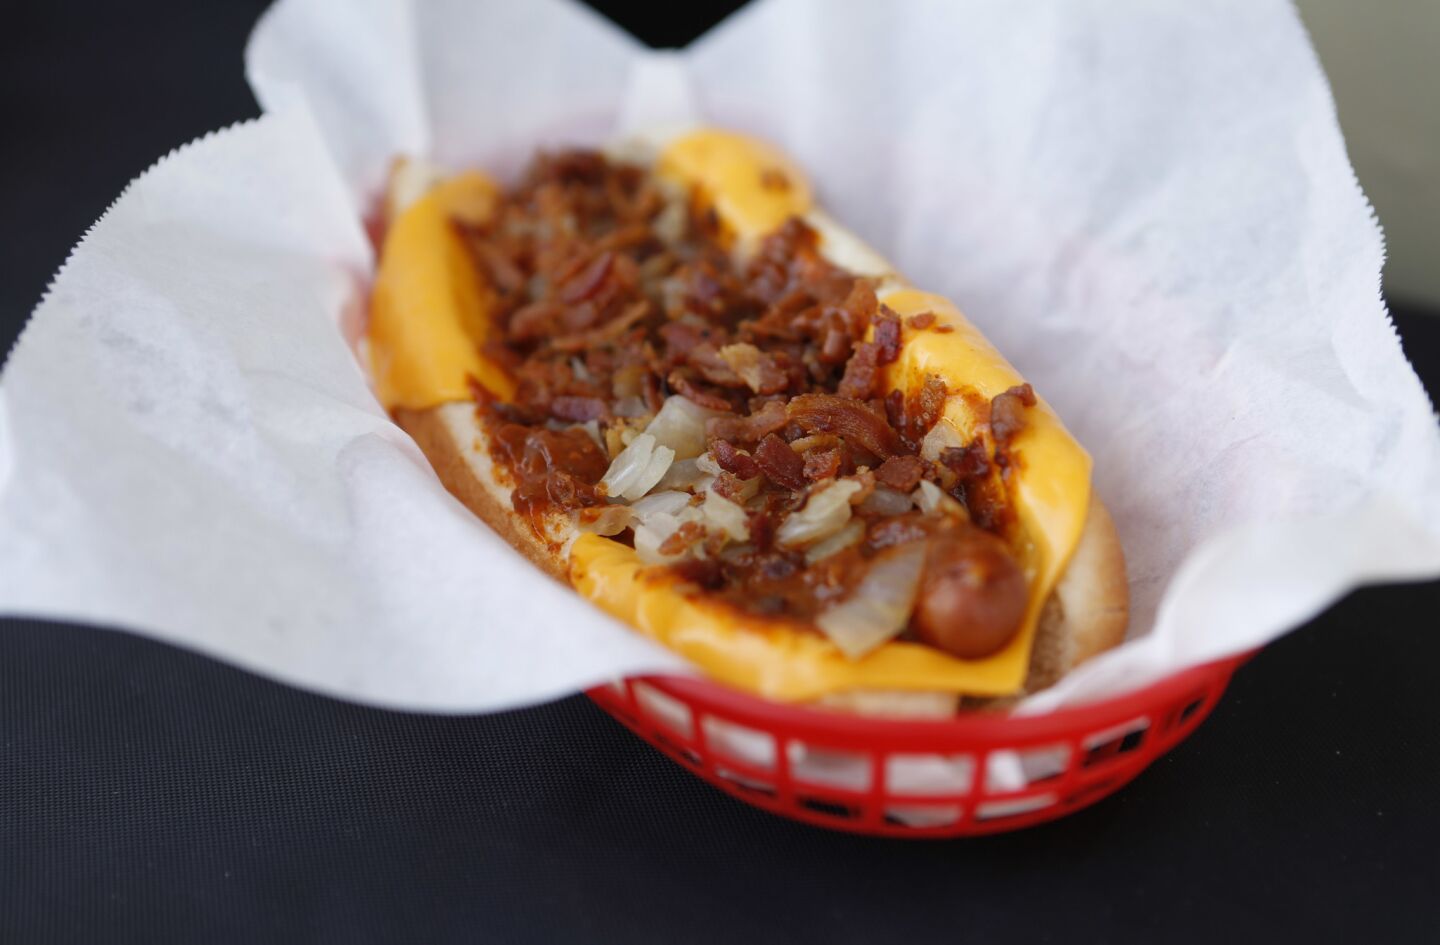 The "Ultimate Chili Dog" hot dog at Tail O' the Pup, a truck specializing in hot dogs.